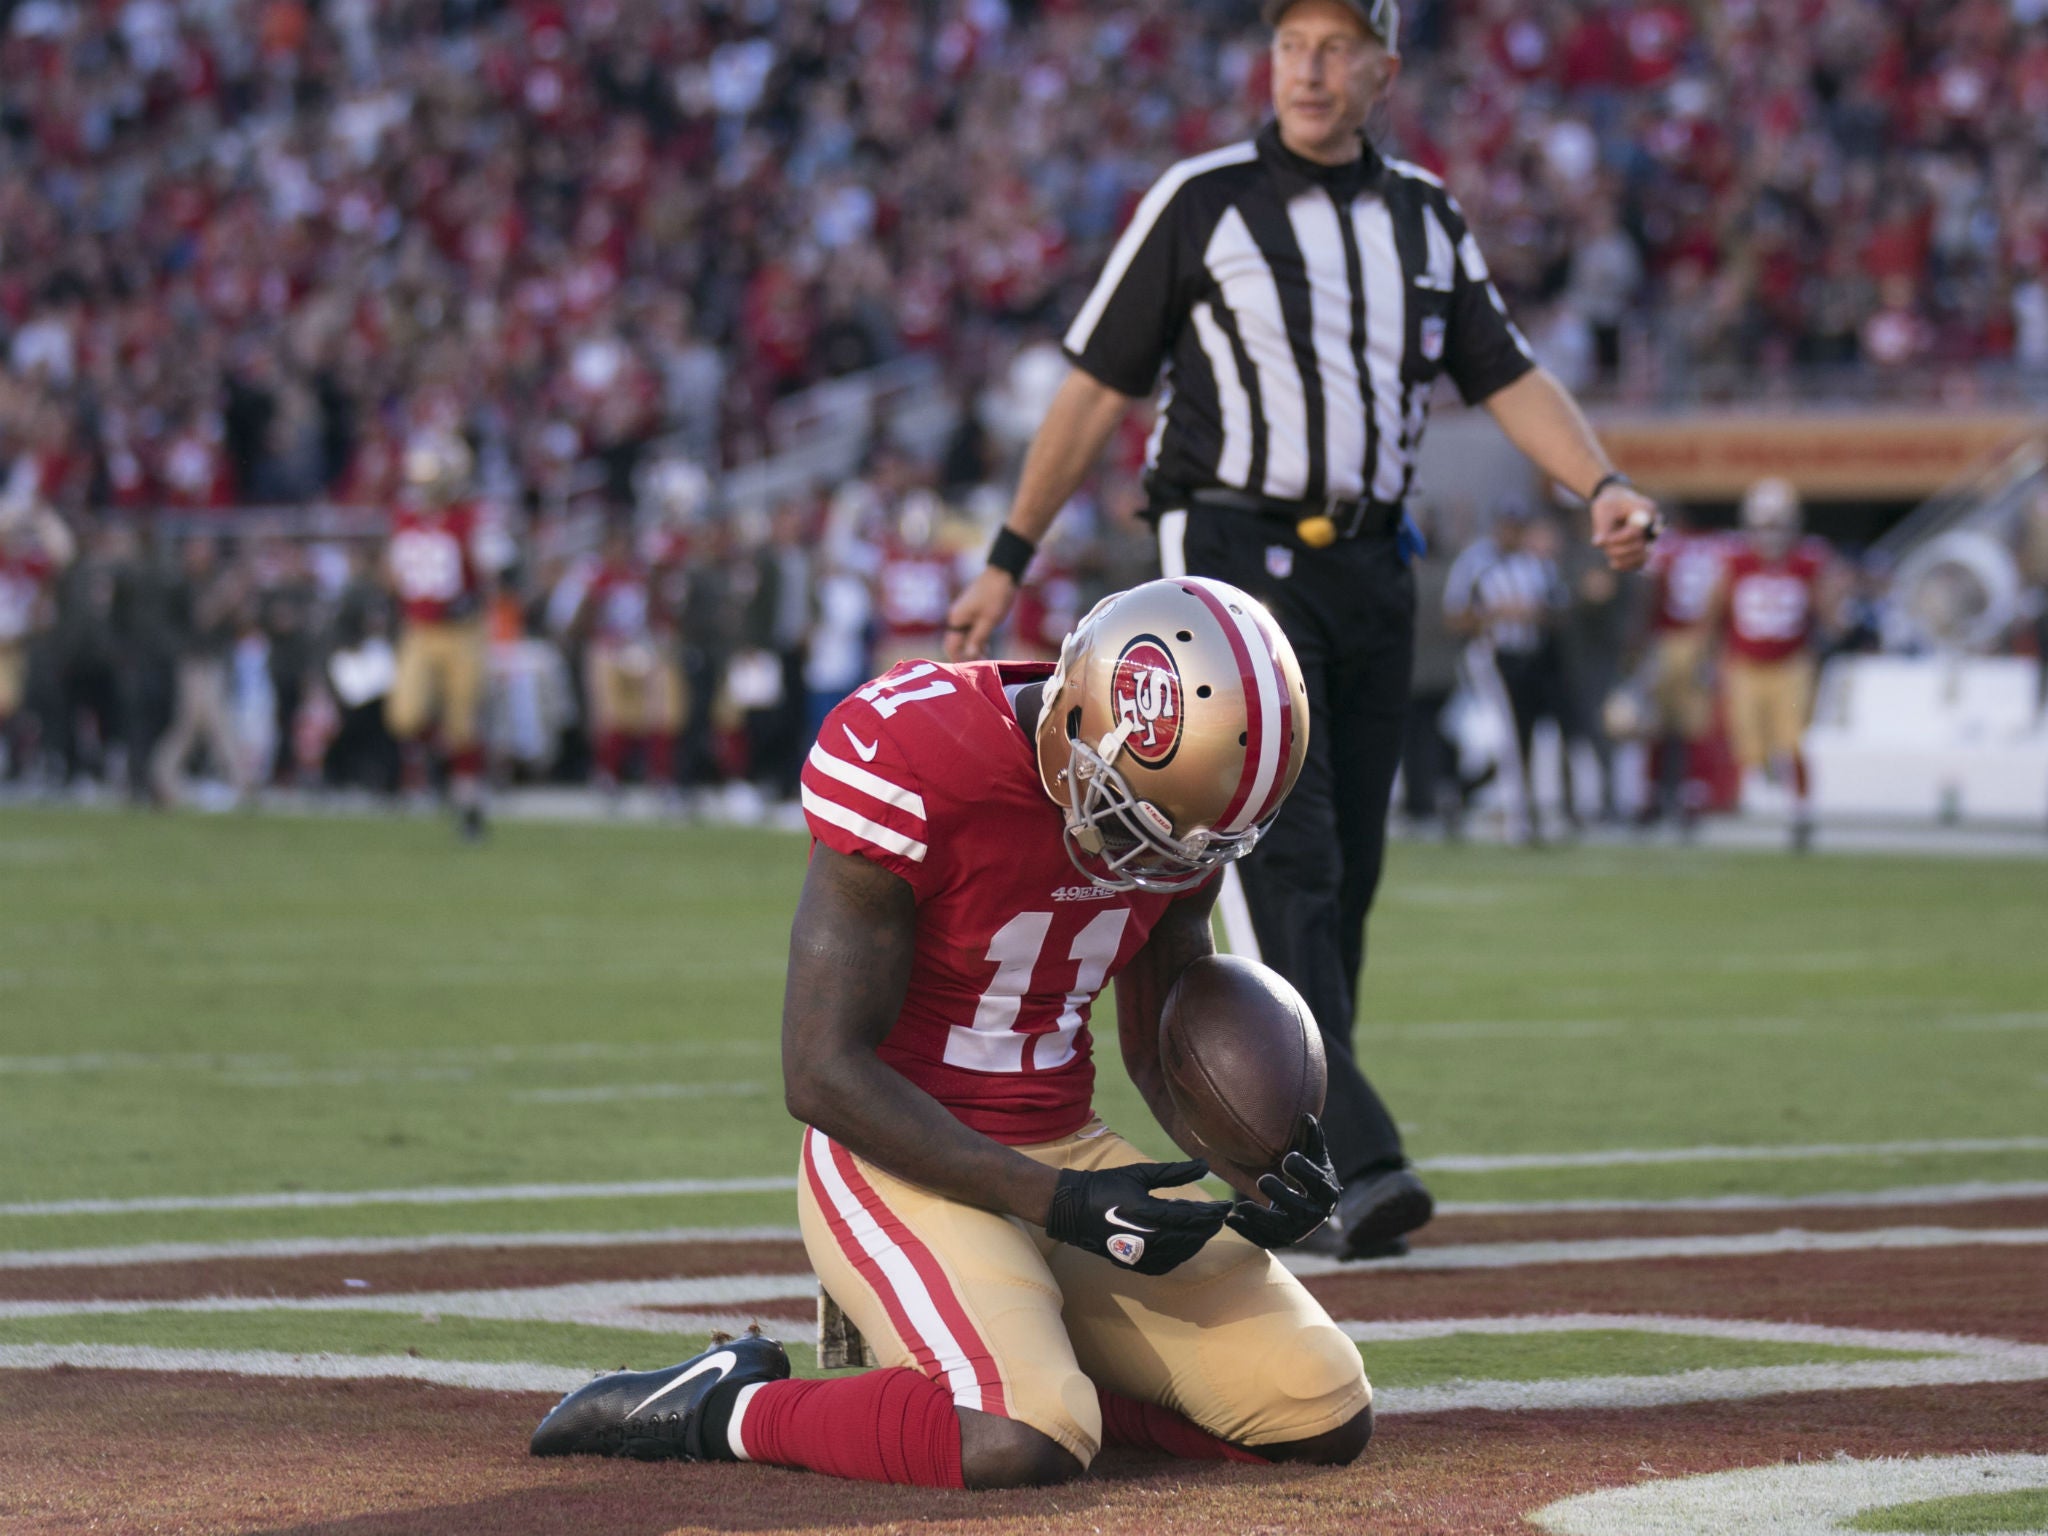 Marquise Goodwin celebrates after scoring a touchdown just hours after the death of his child, on November 12, 2017 in Santa Clara, California